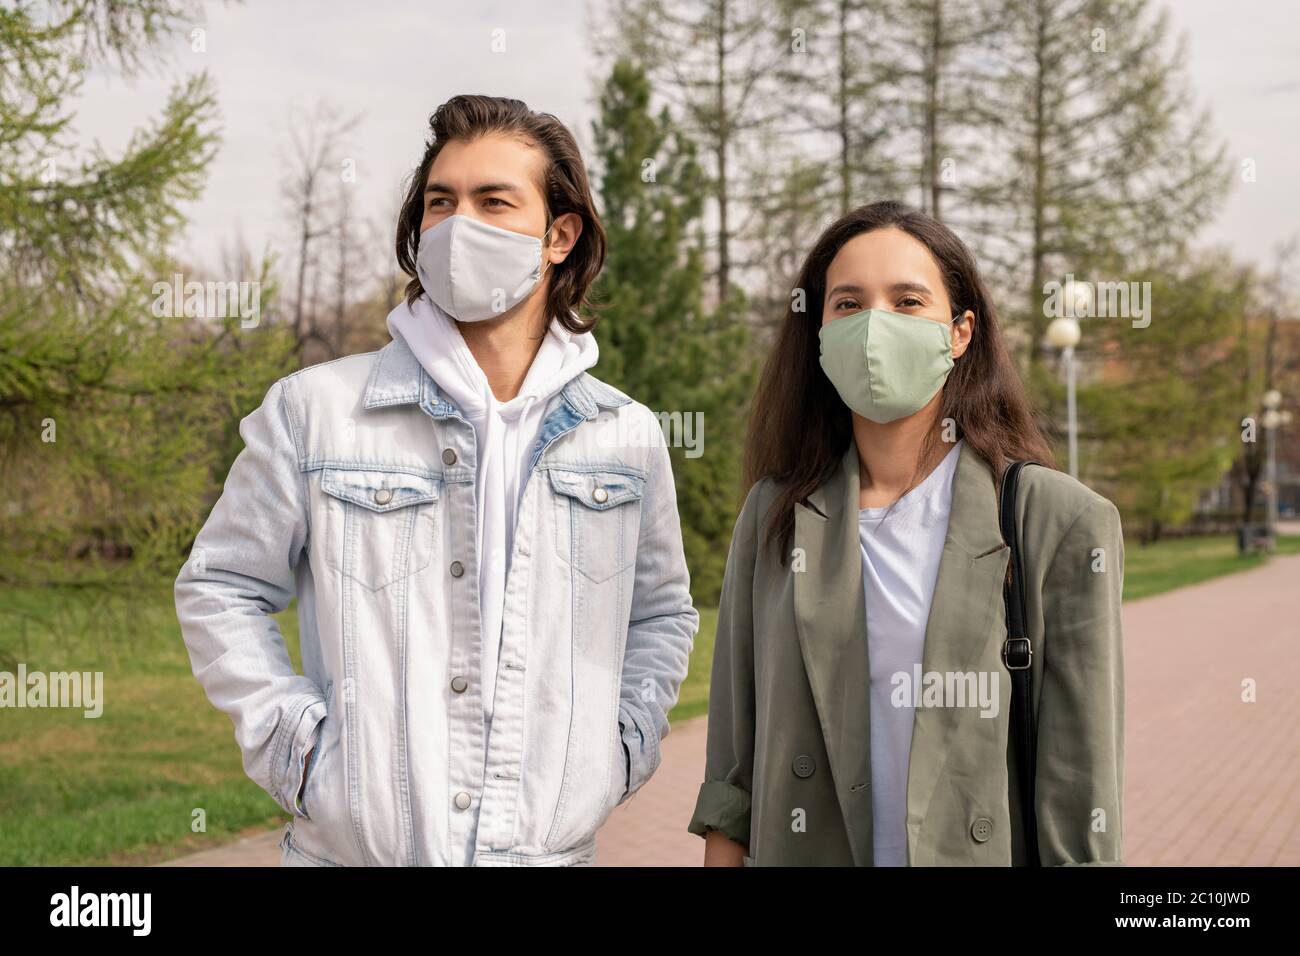 Young couple in facial masks walking together in city park during coronavirus epidemic Stock Photo